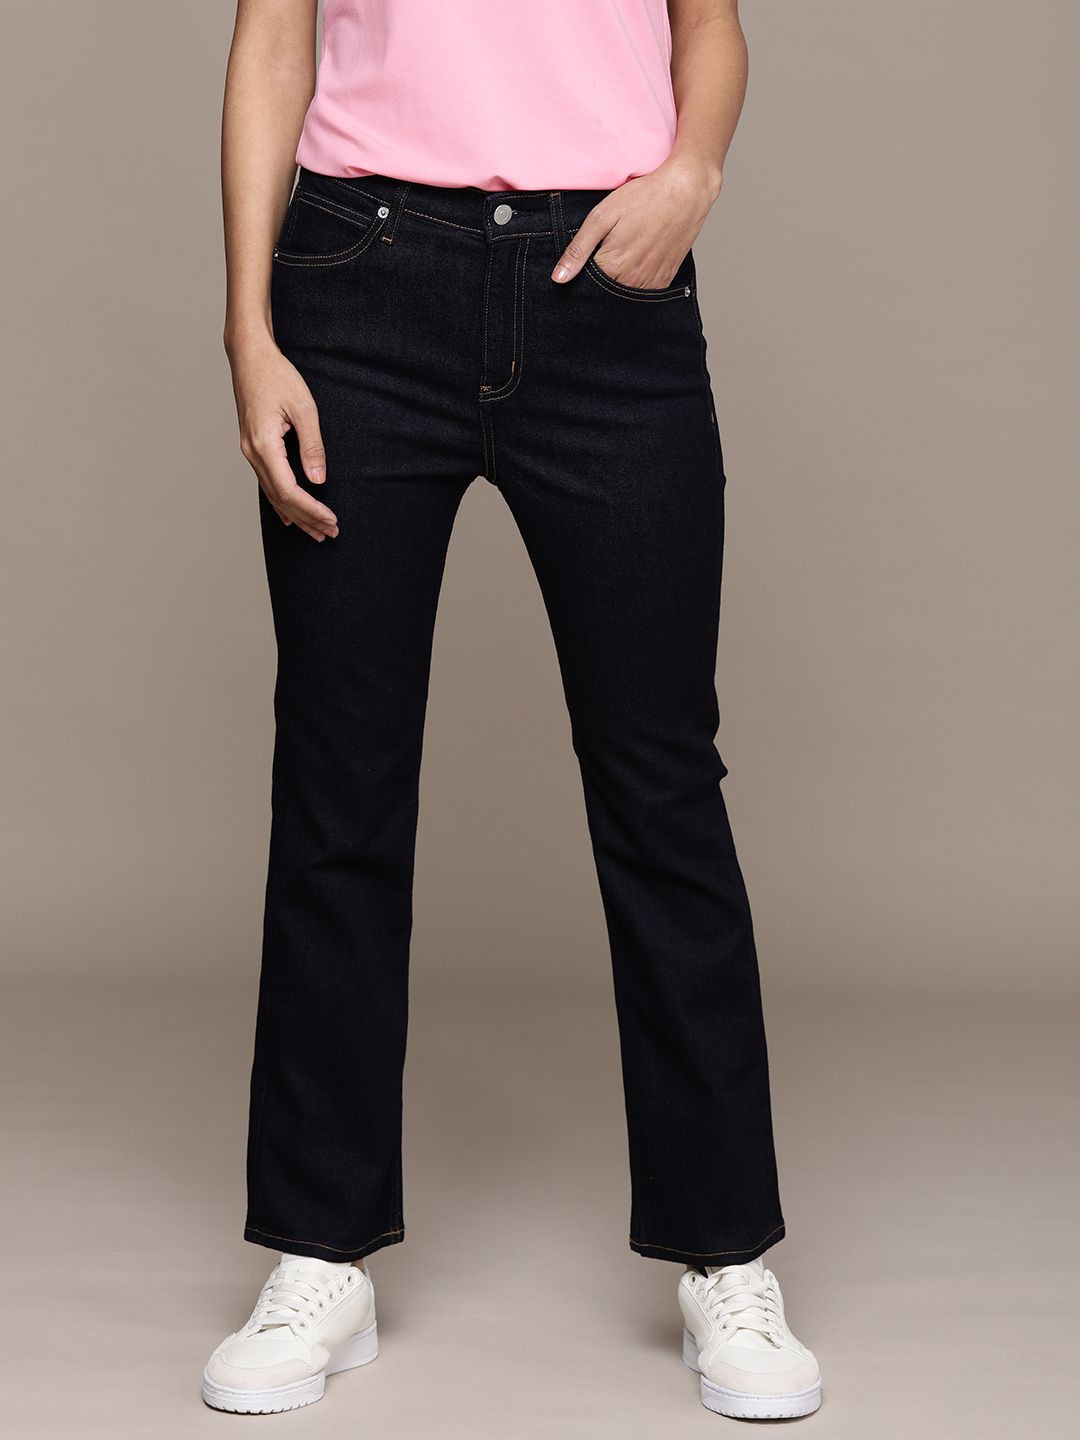 Calvin Klein Jeans Women Blue Body Slim Fit Stretchable Jeans Price in India